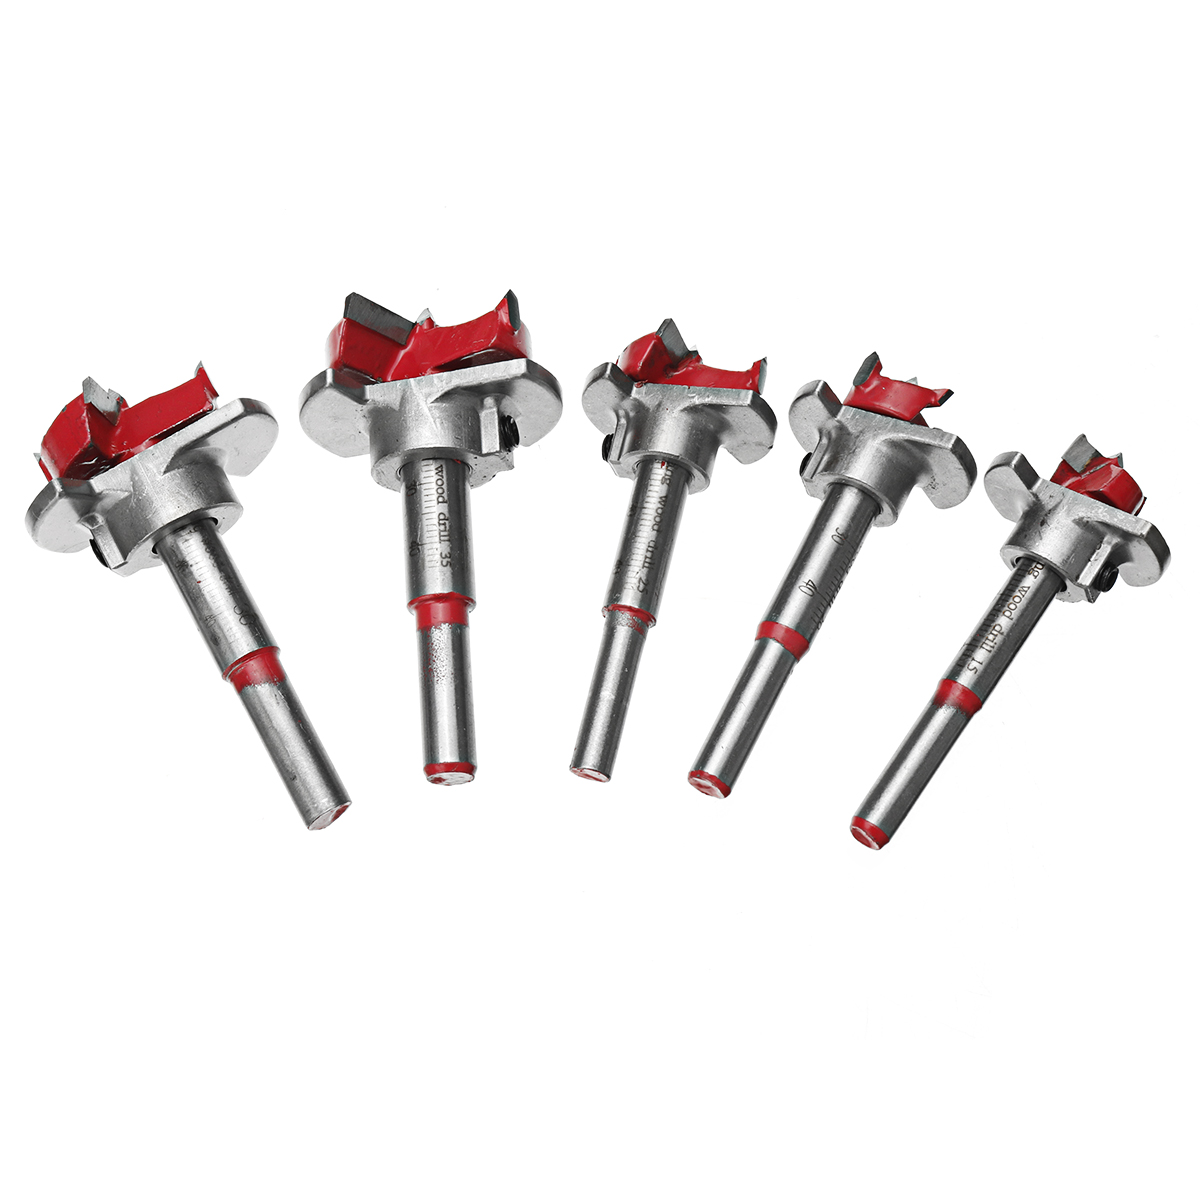 7pcs-Blue-or-Red-Woodworking-Hinge-Hole-Opener-Set-Positioning-Hole-Saw-Cutter-Drill-Bits-1615475-6